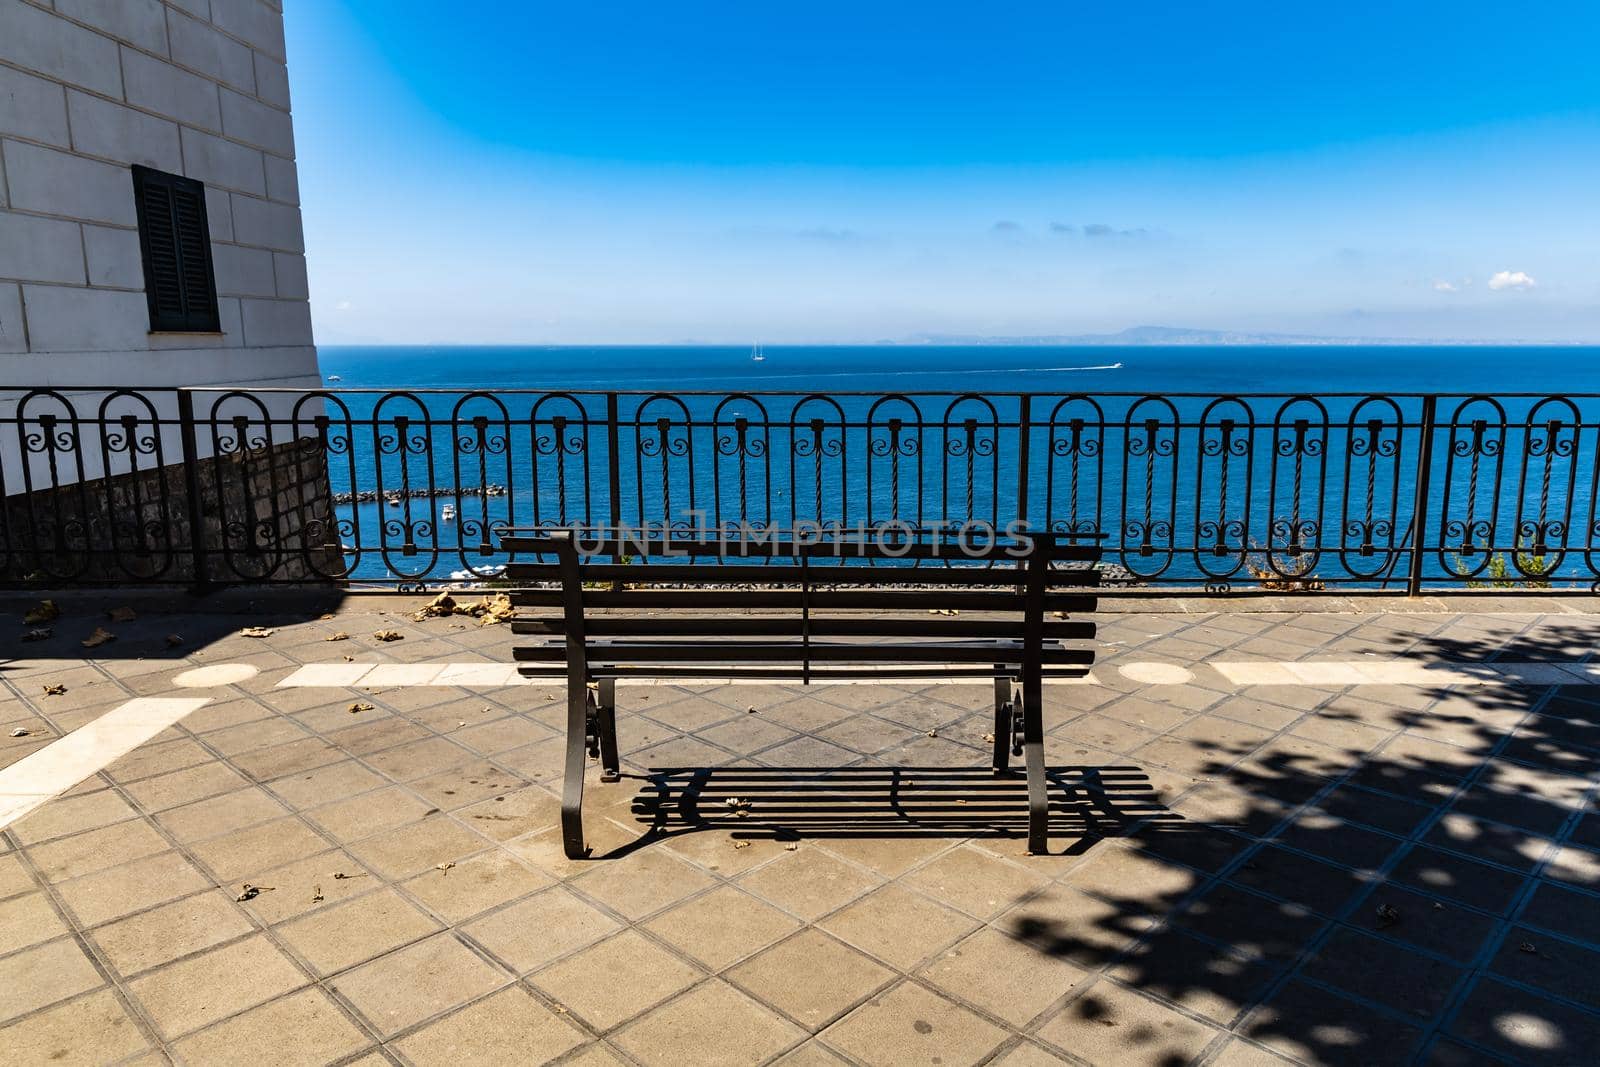 Small bench standing on the edge in front of metal railing with beautiful view to the sea